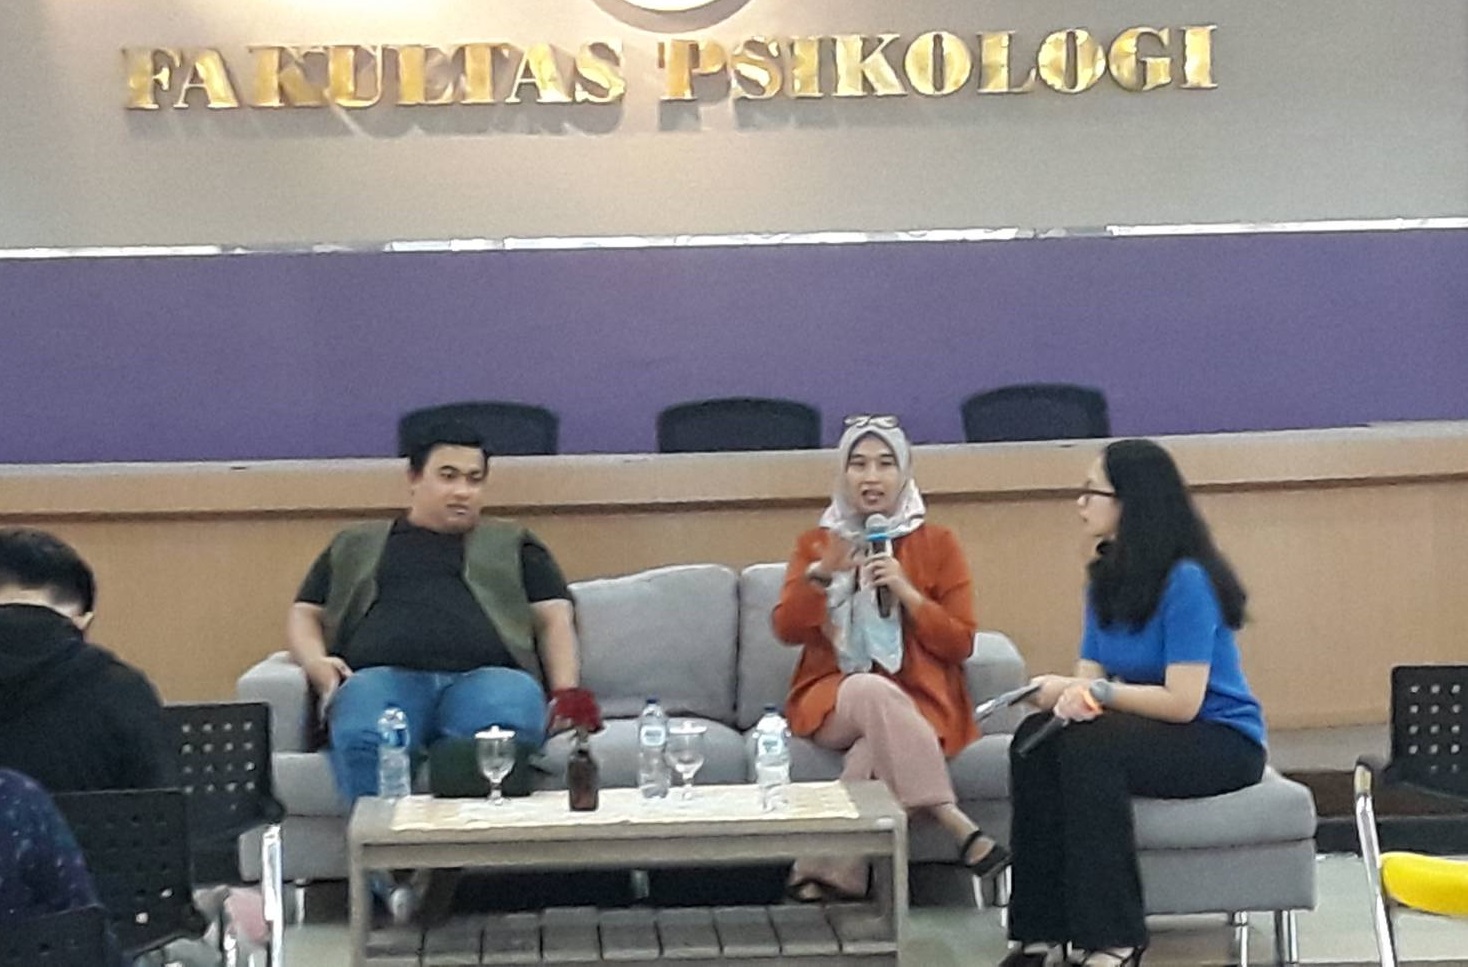 Ahmed Tessario ST, M.MT. and Ike Herdiana M.Psi speak about Quarter Life Crisis at UNAIR Faculty of Psychology